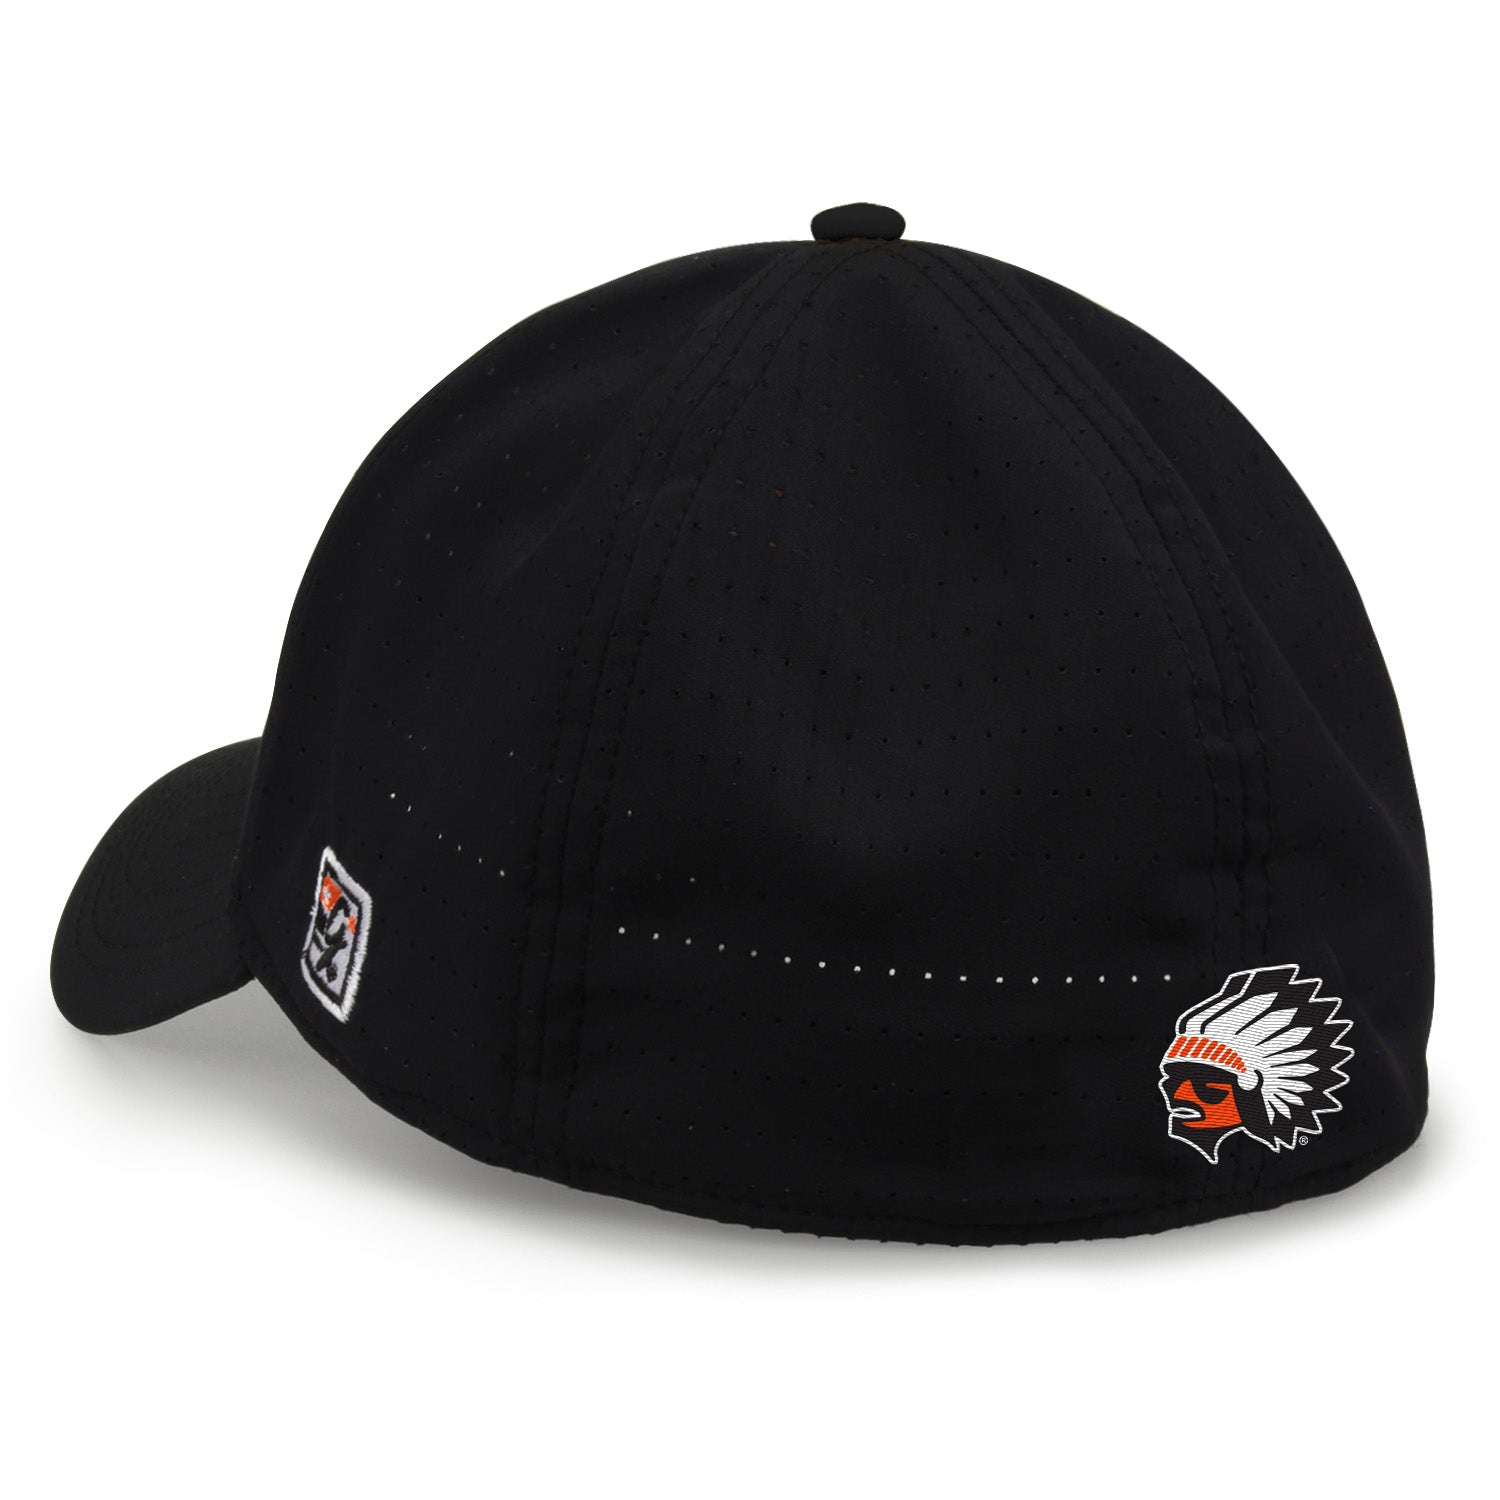 GameChanger Perforated Stretch Cap